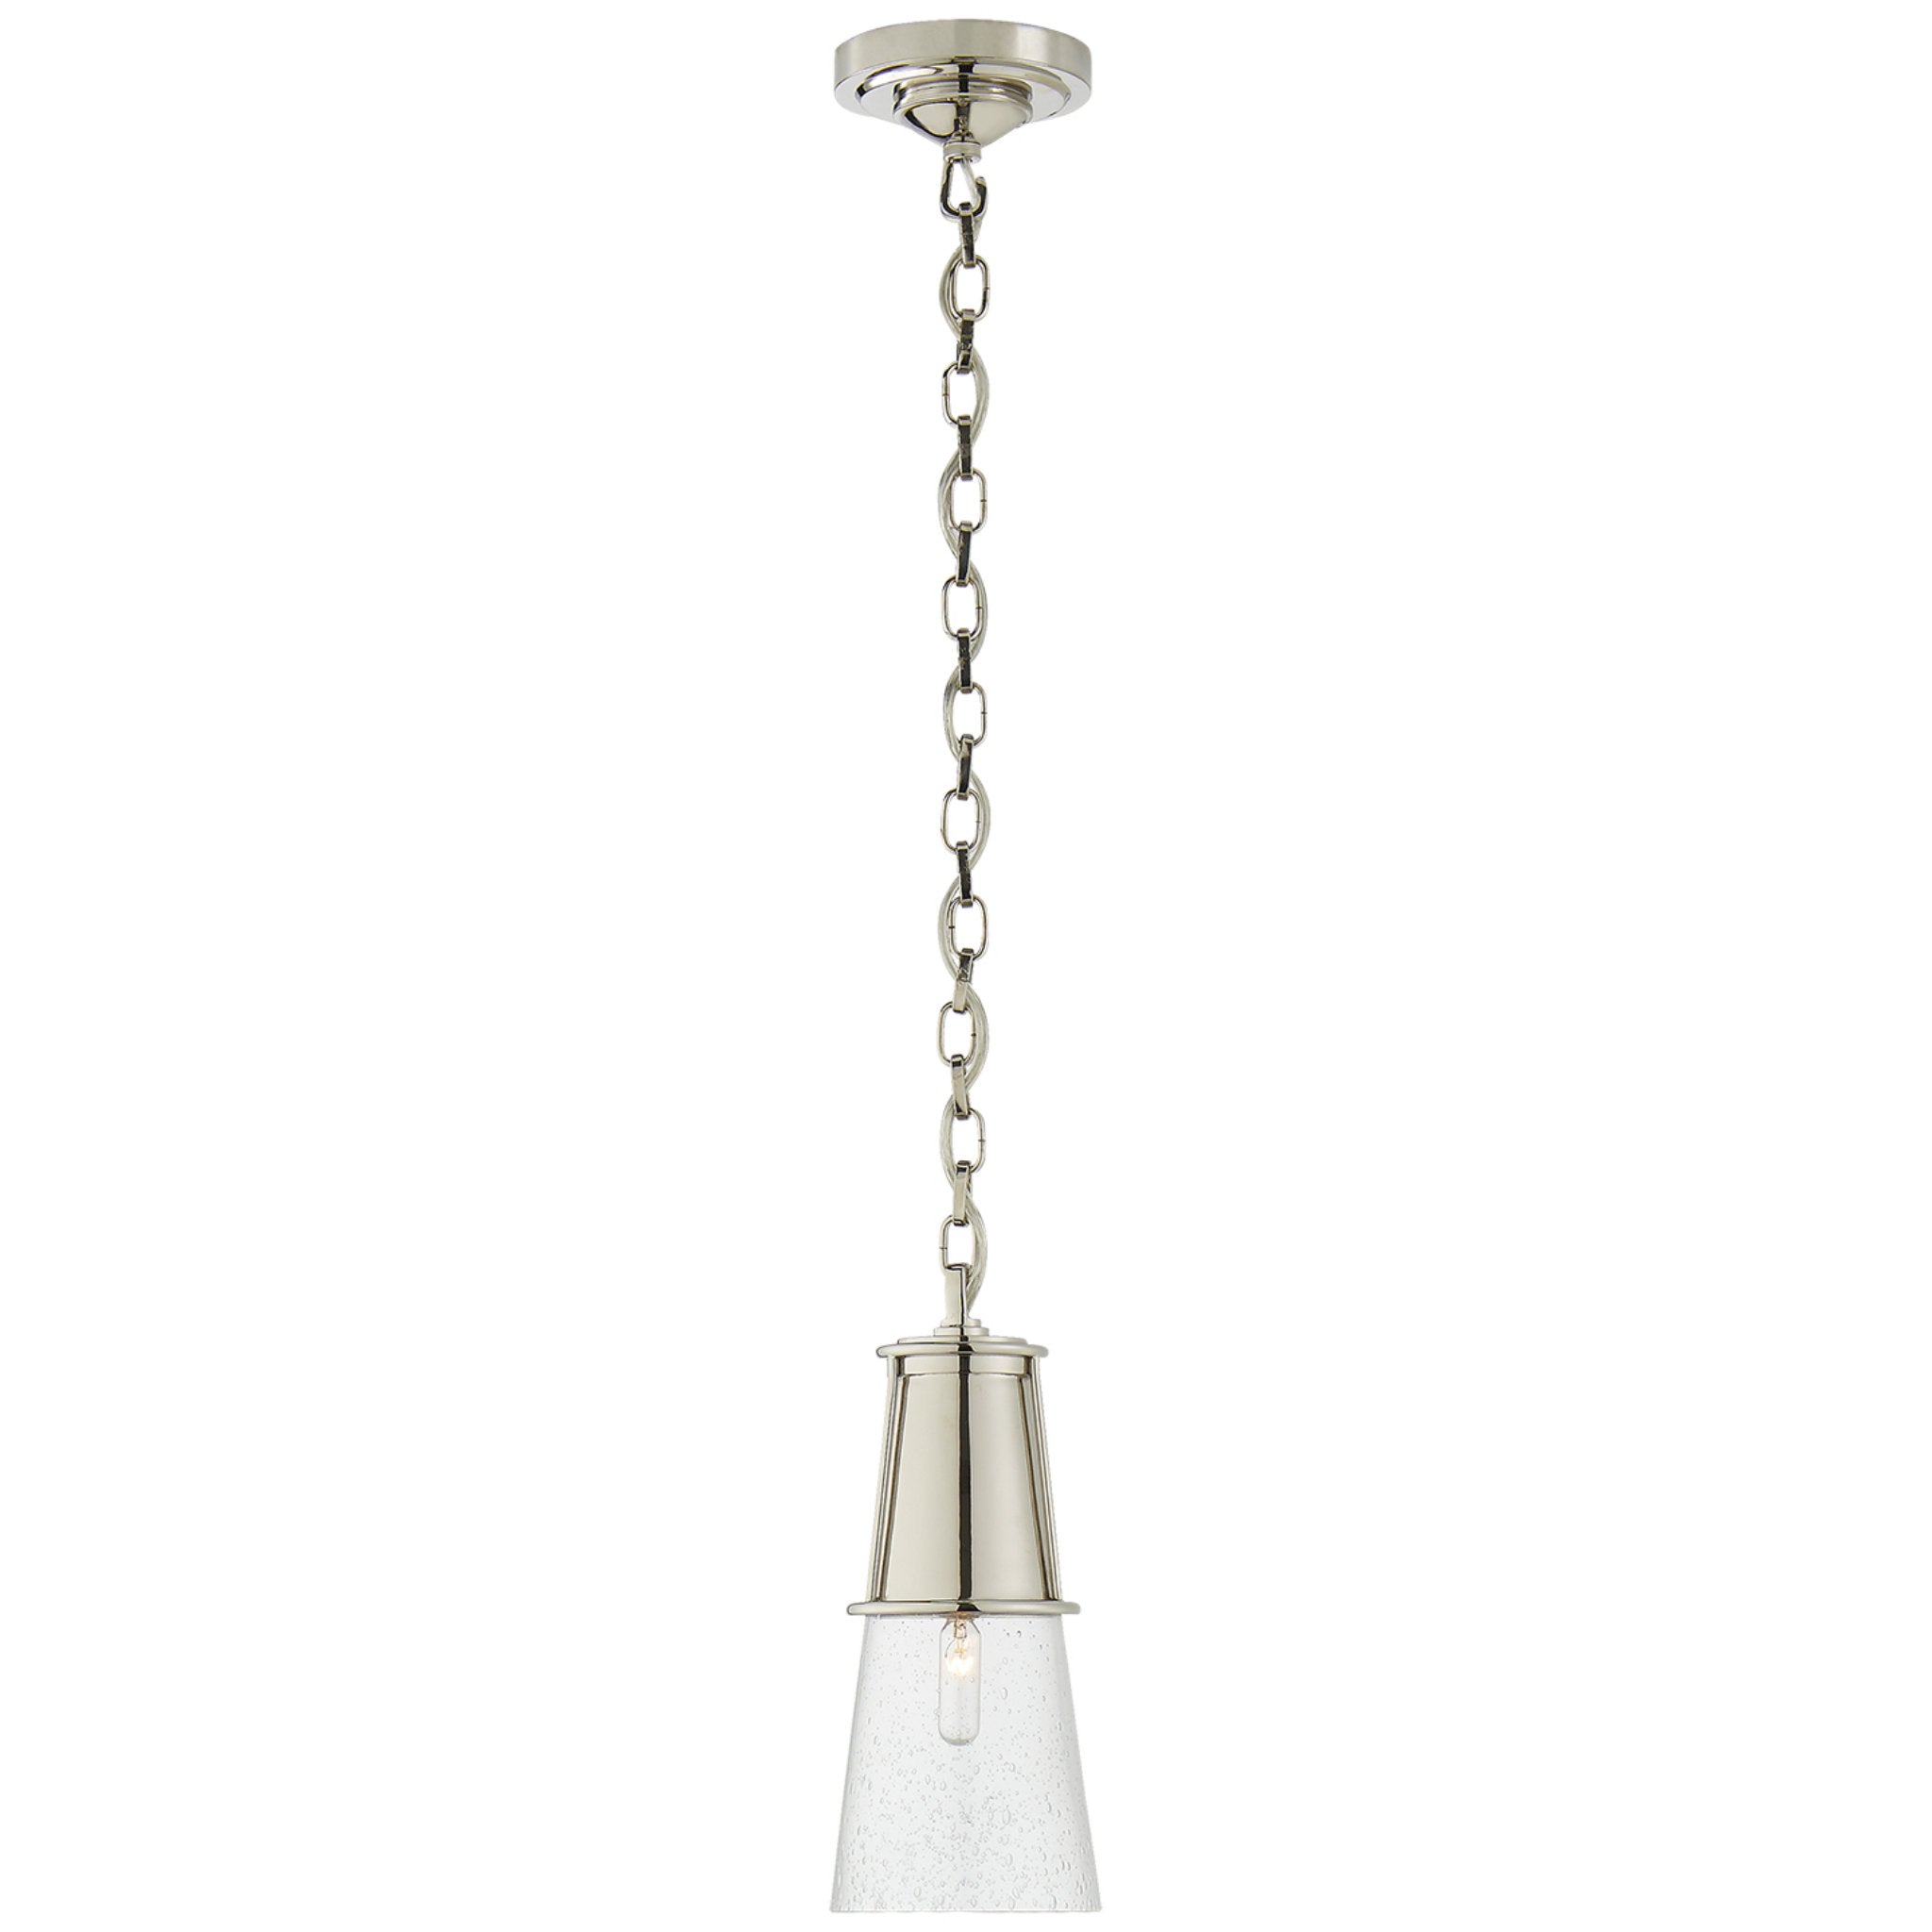 Thomas O'Brien Robinson Small Pendant in Polished Nickel with Seeded Glass